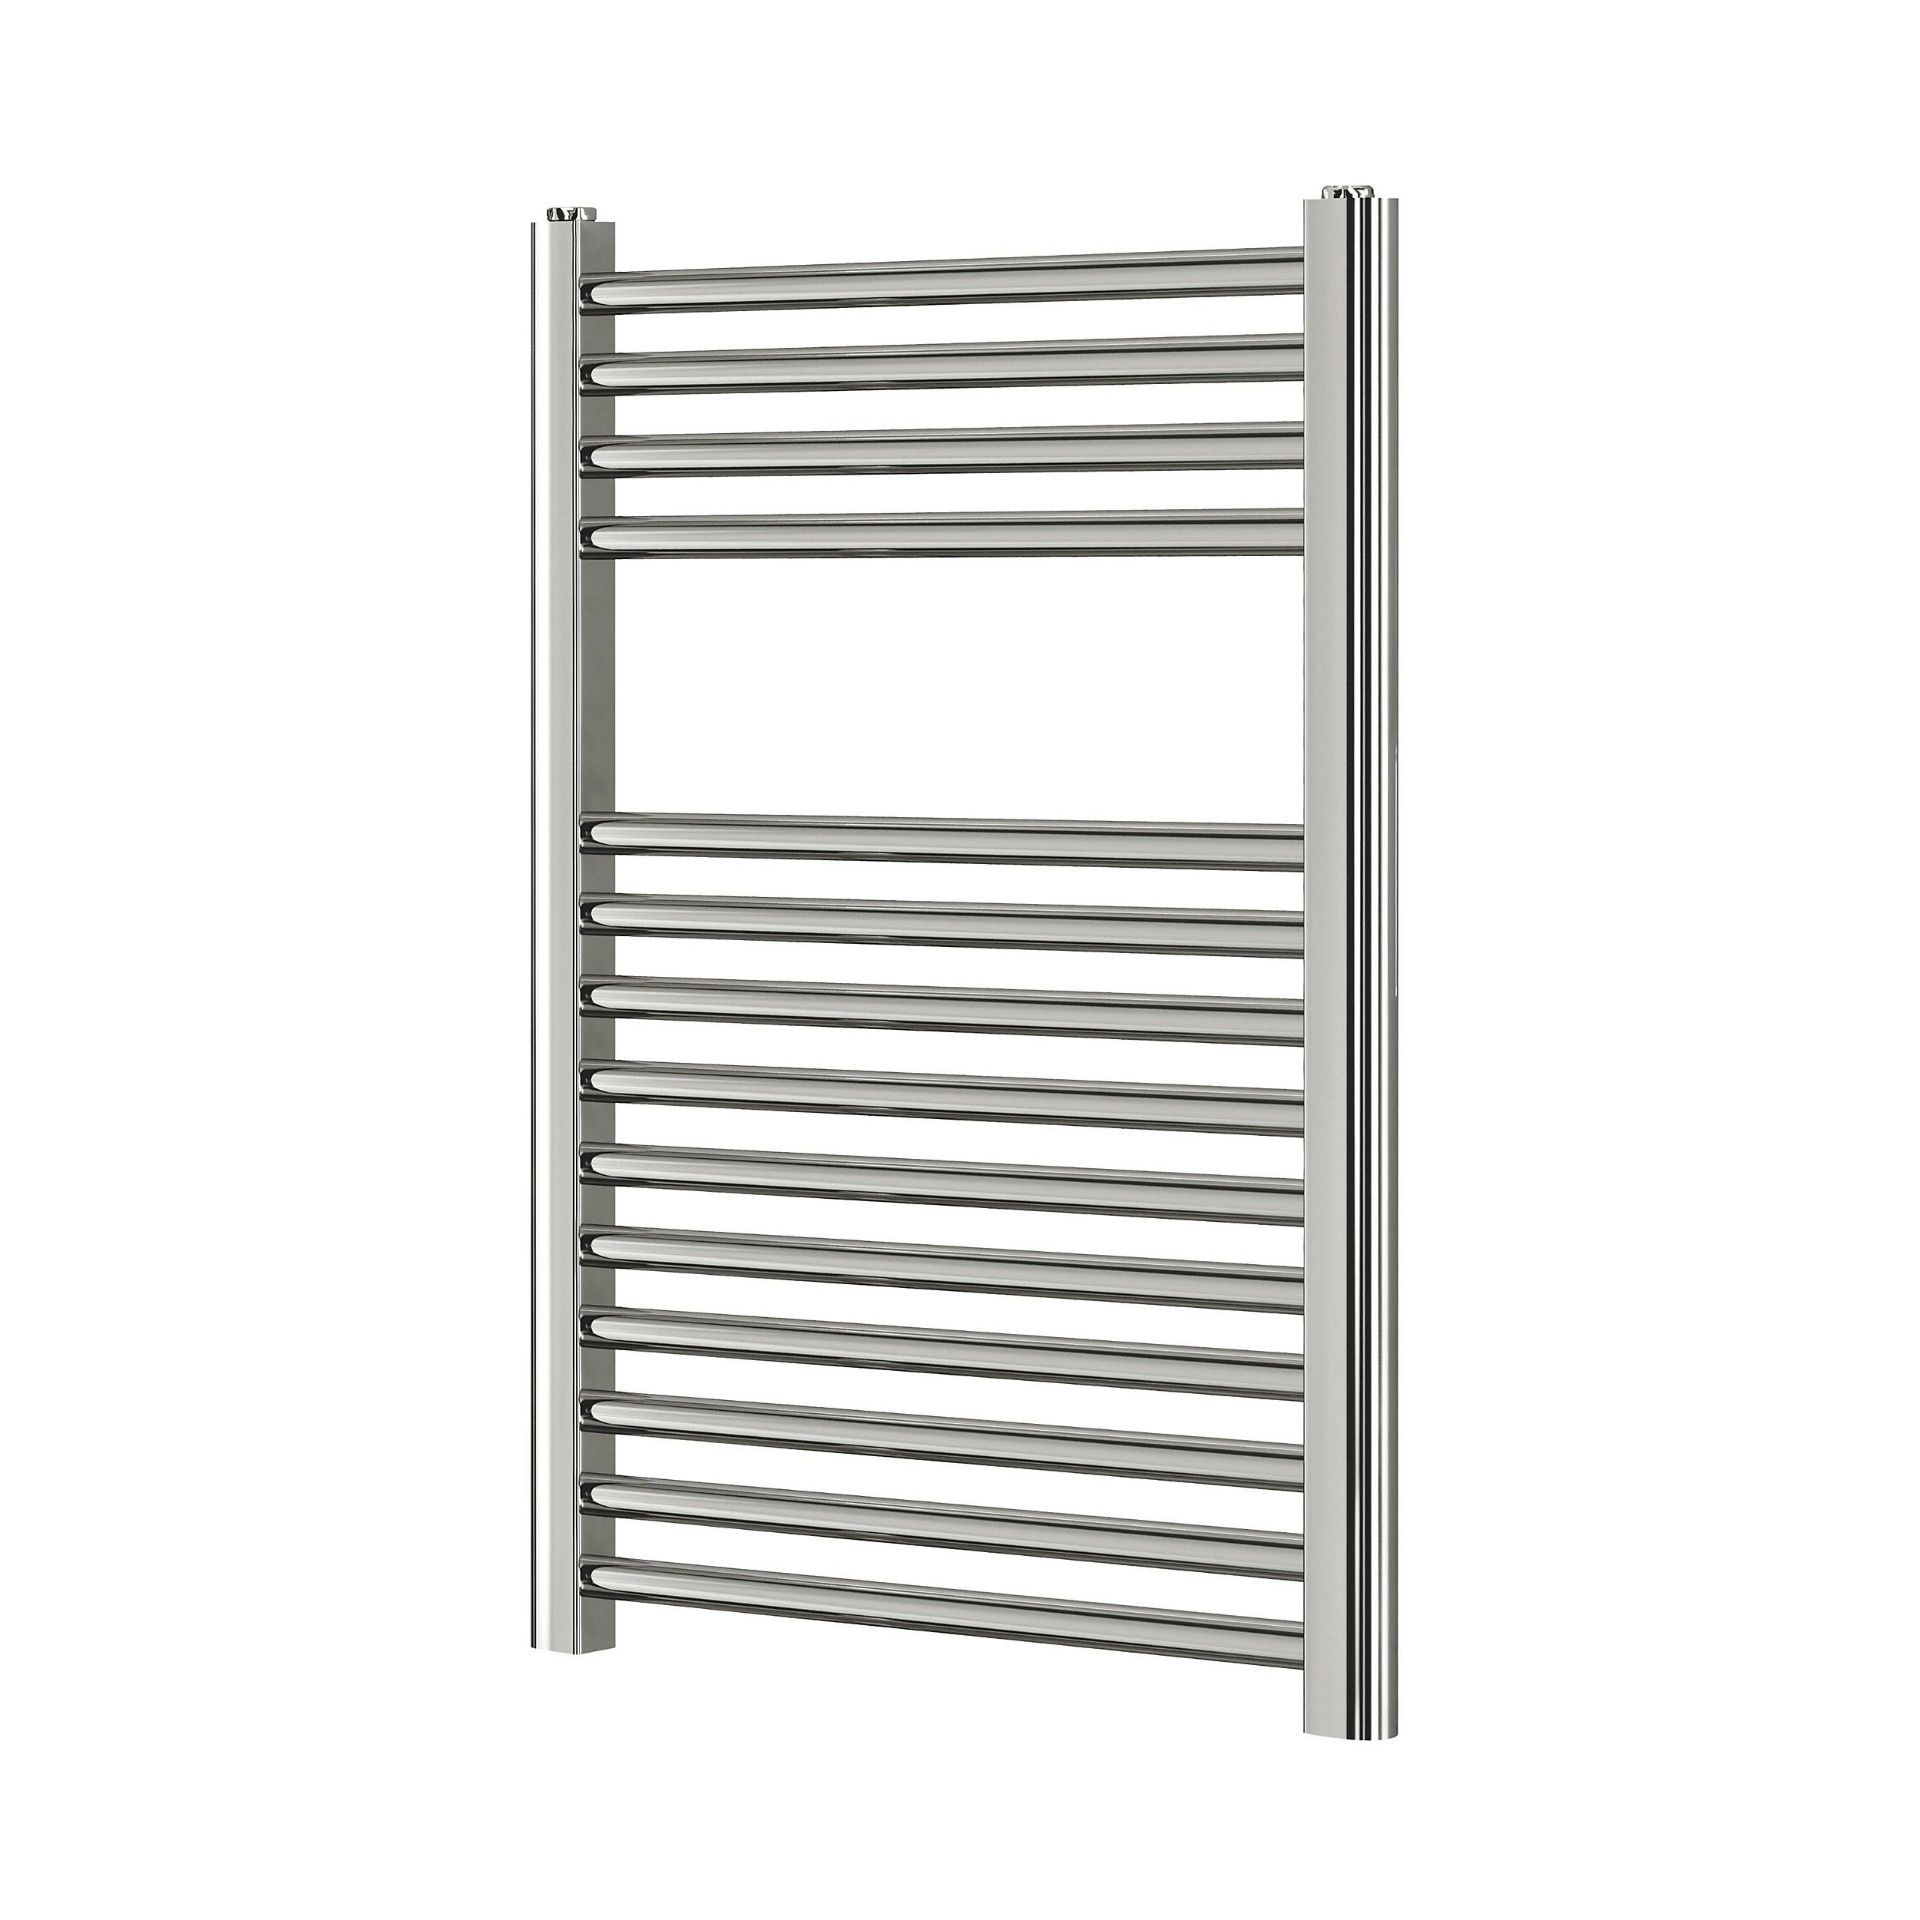 2 X BLYSS TOWEL RAILS IN VARIOUS SIZES R19-6